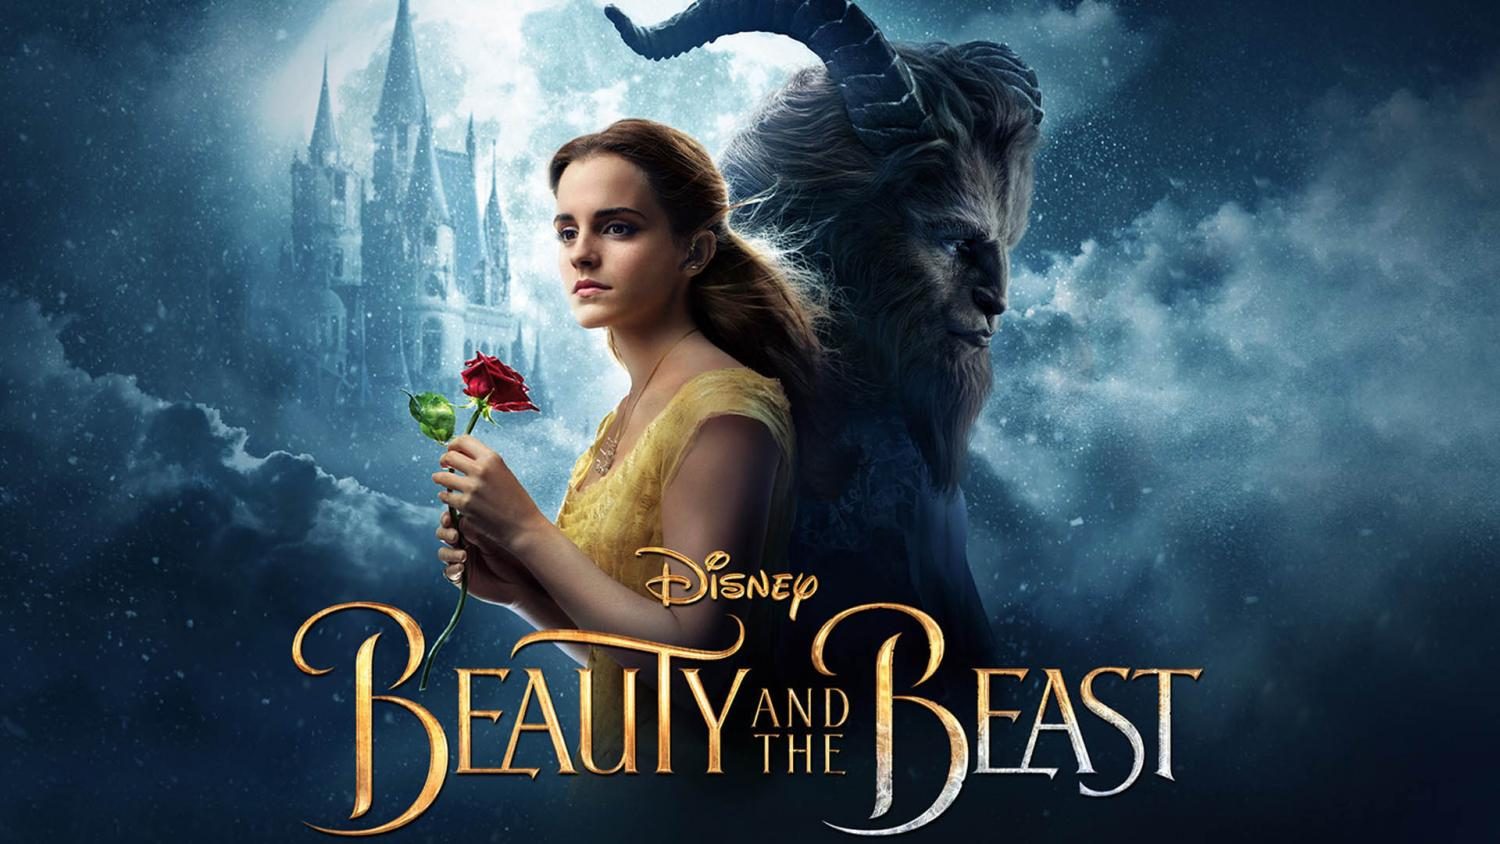 Movie+Review%3A+Beauty+and+the+Beast